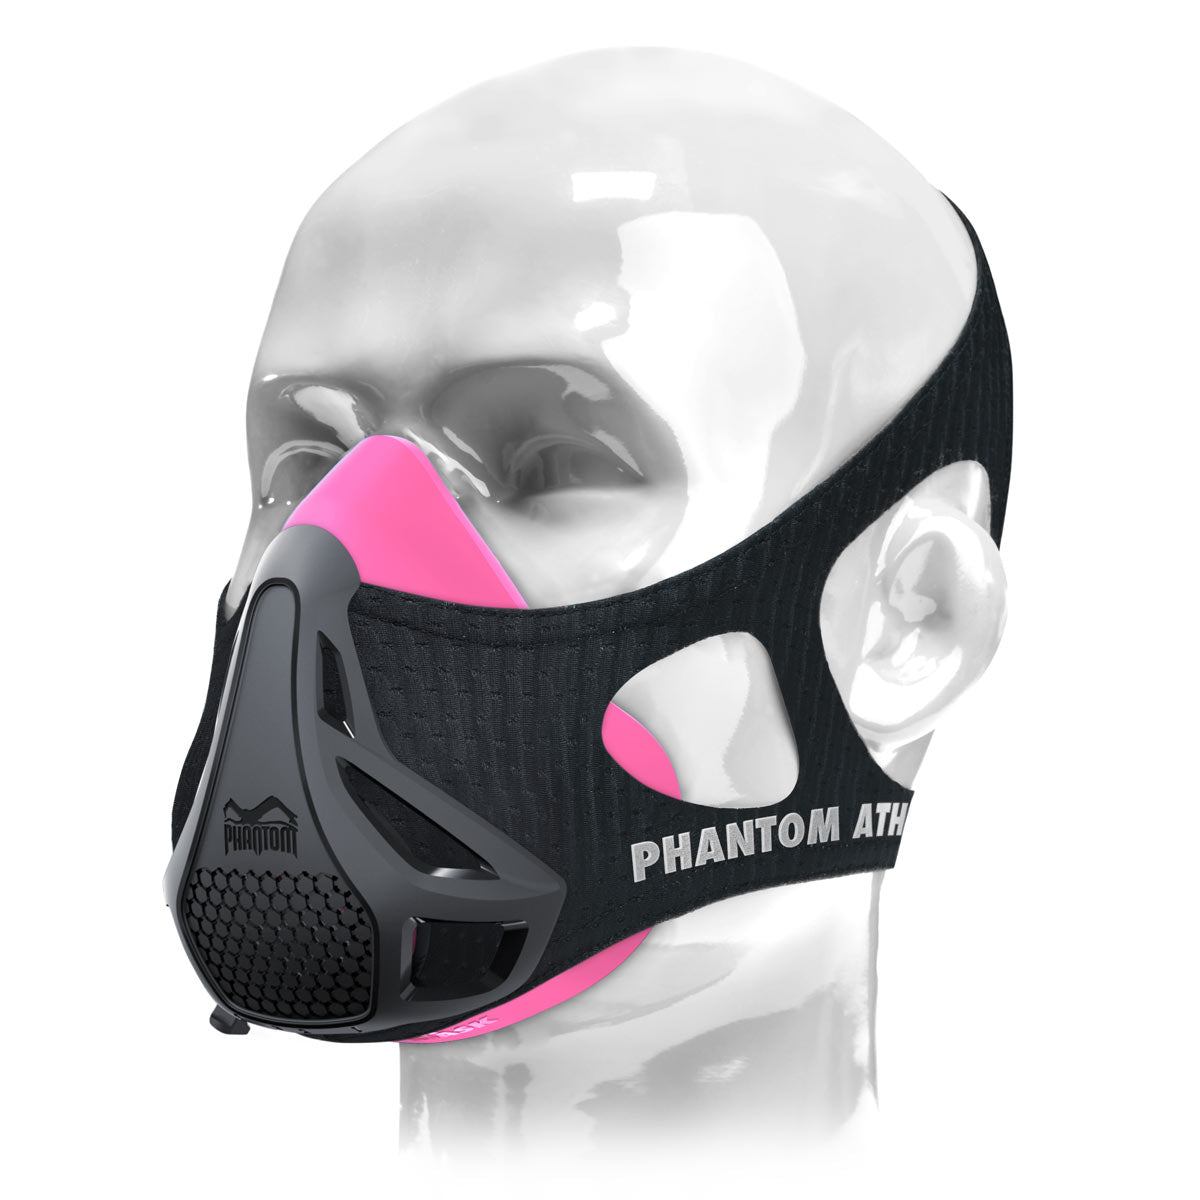 The Phantom training mask. The original. Patented and awarded to take your fitness to the next level. Now in pink/black.